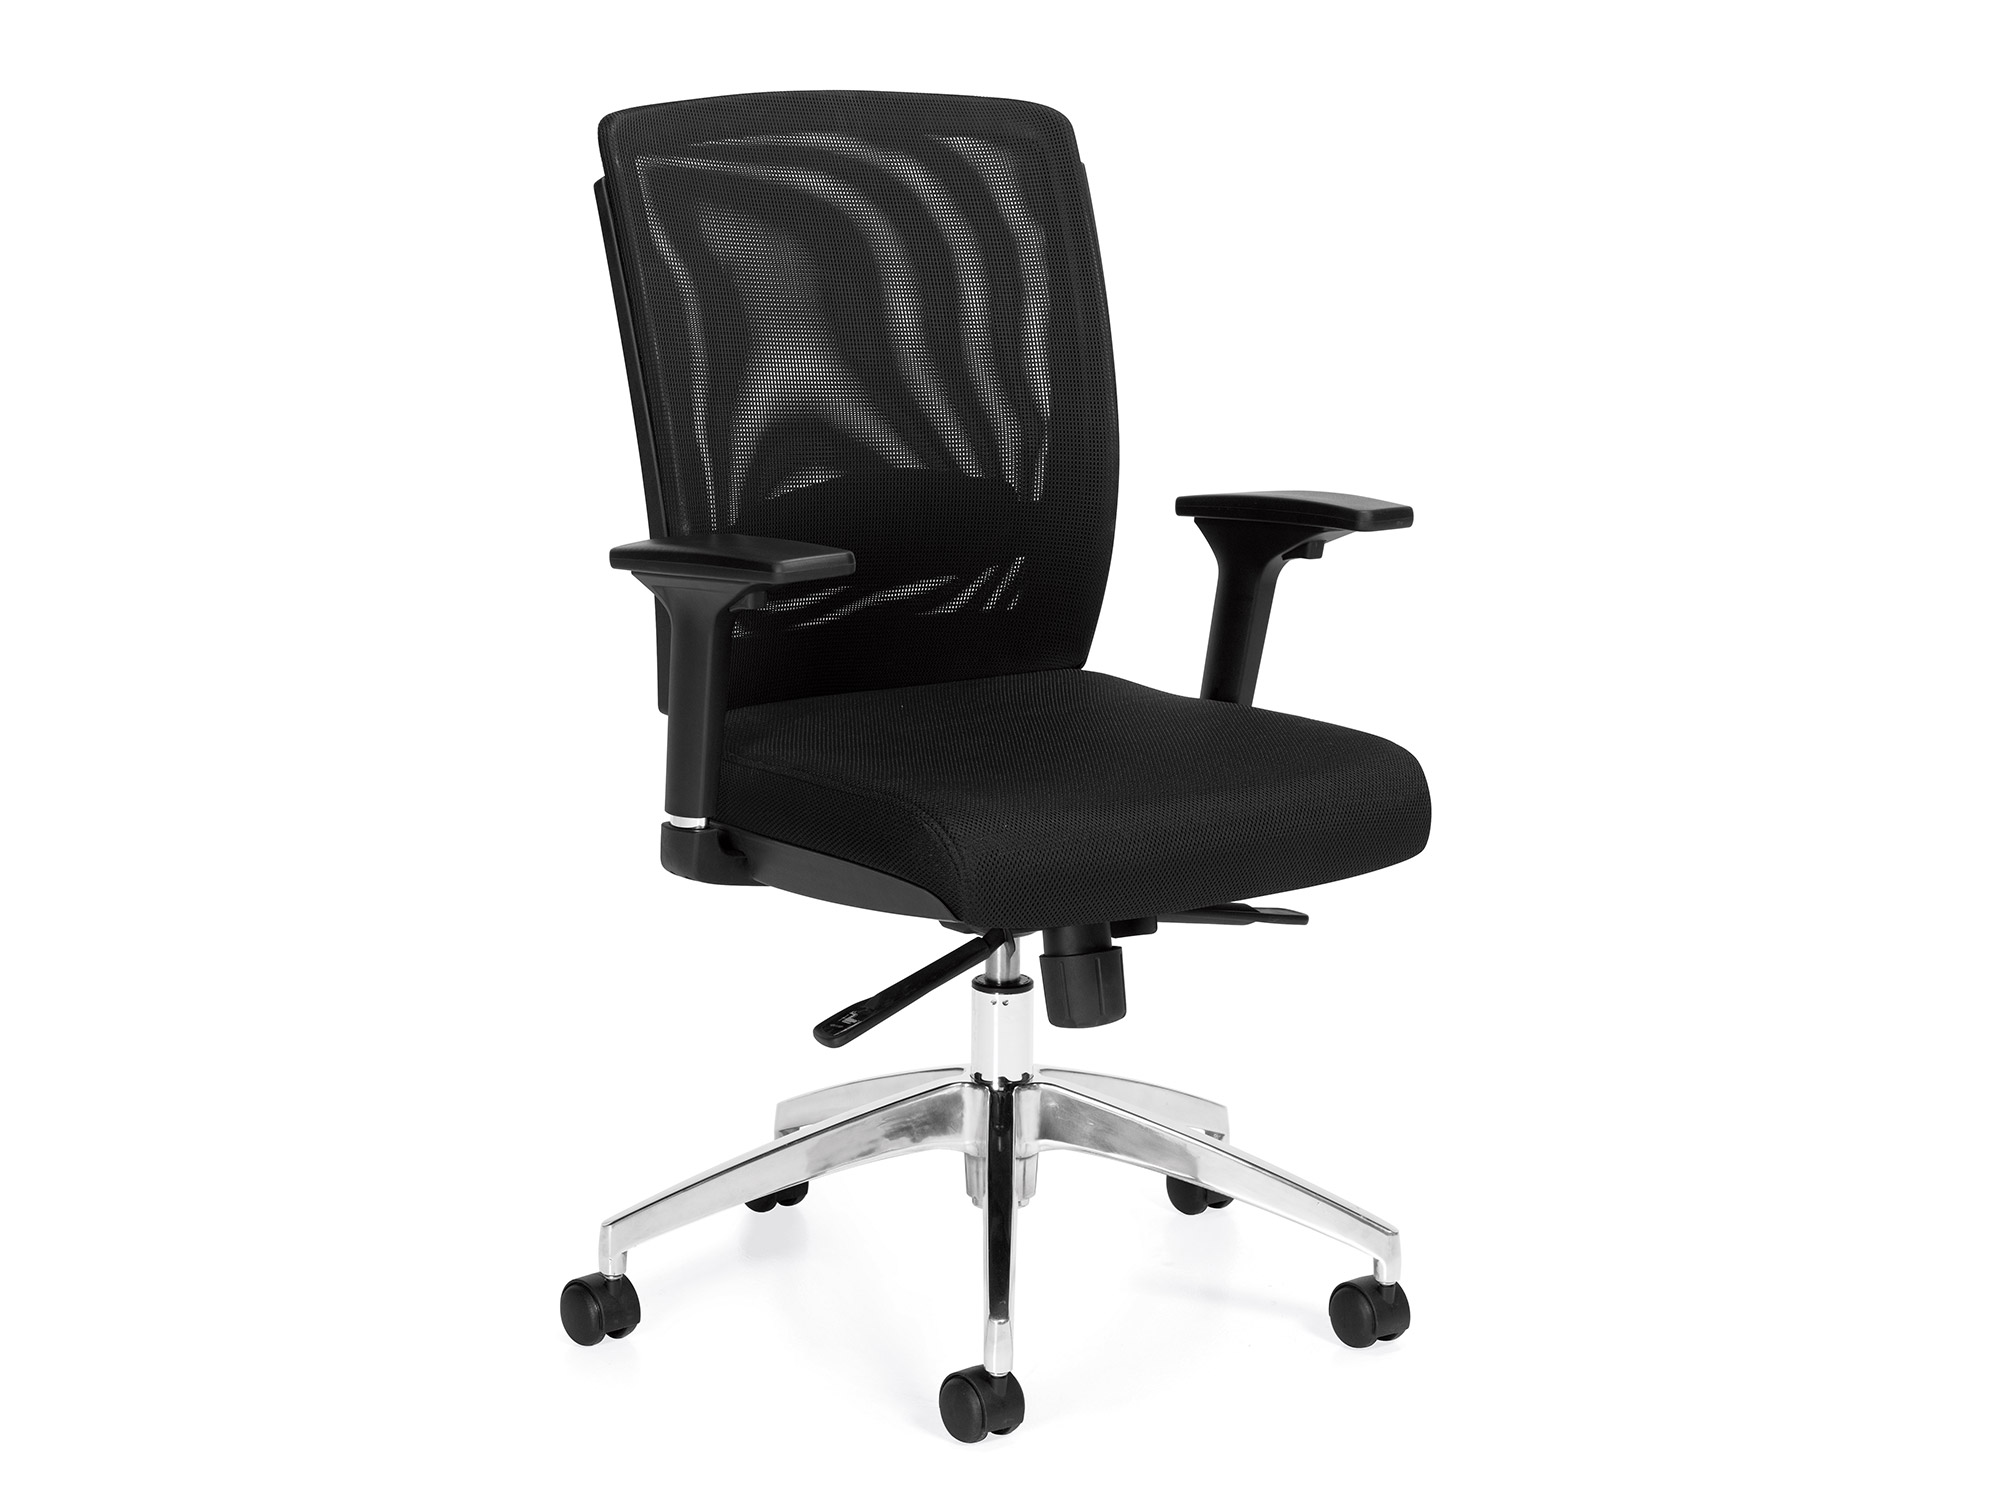 chairs for office #10904b UYSONMA